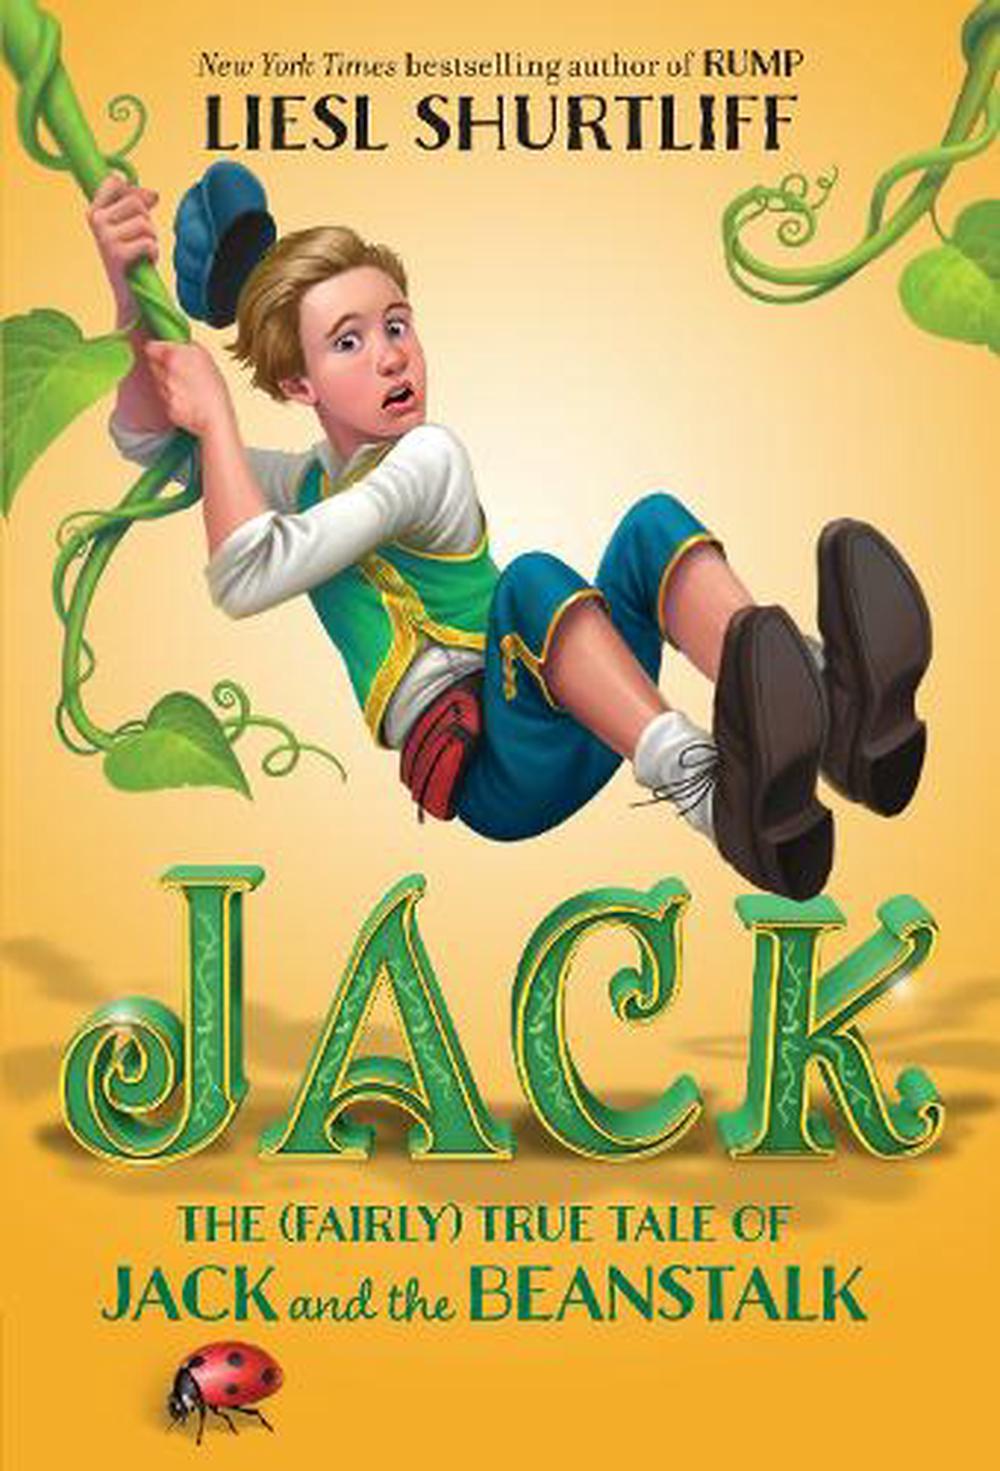 book review of jack and the beanstalk